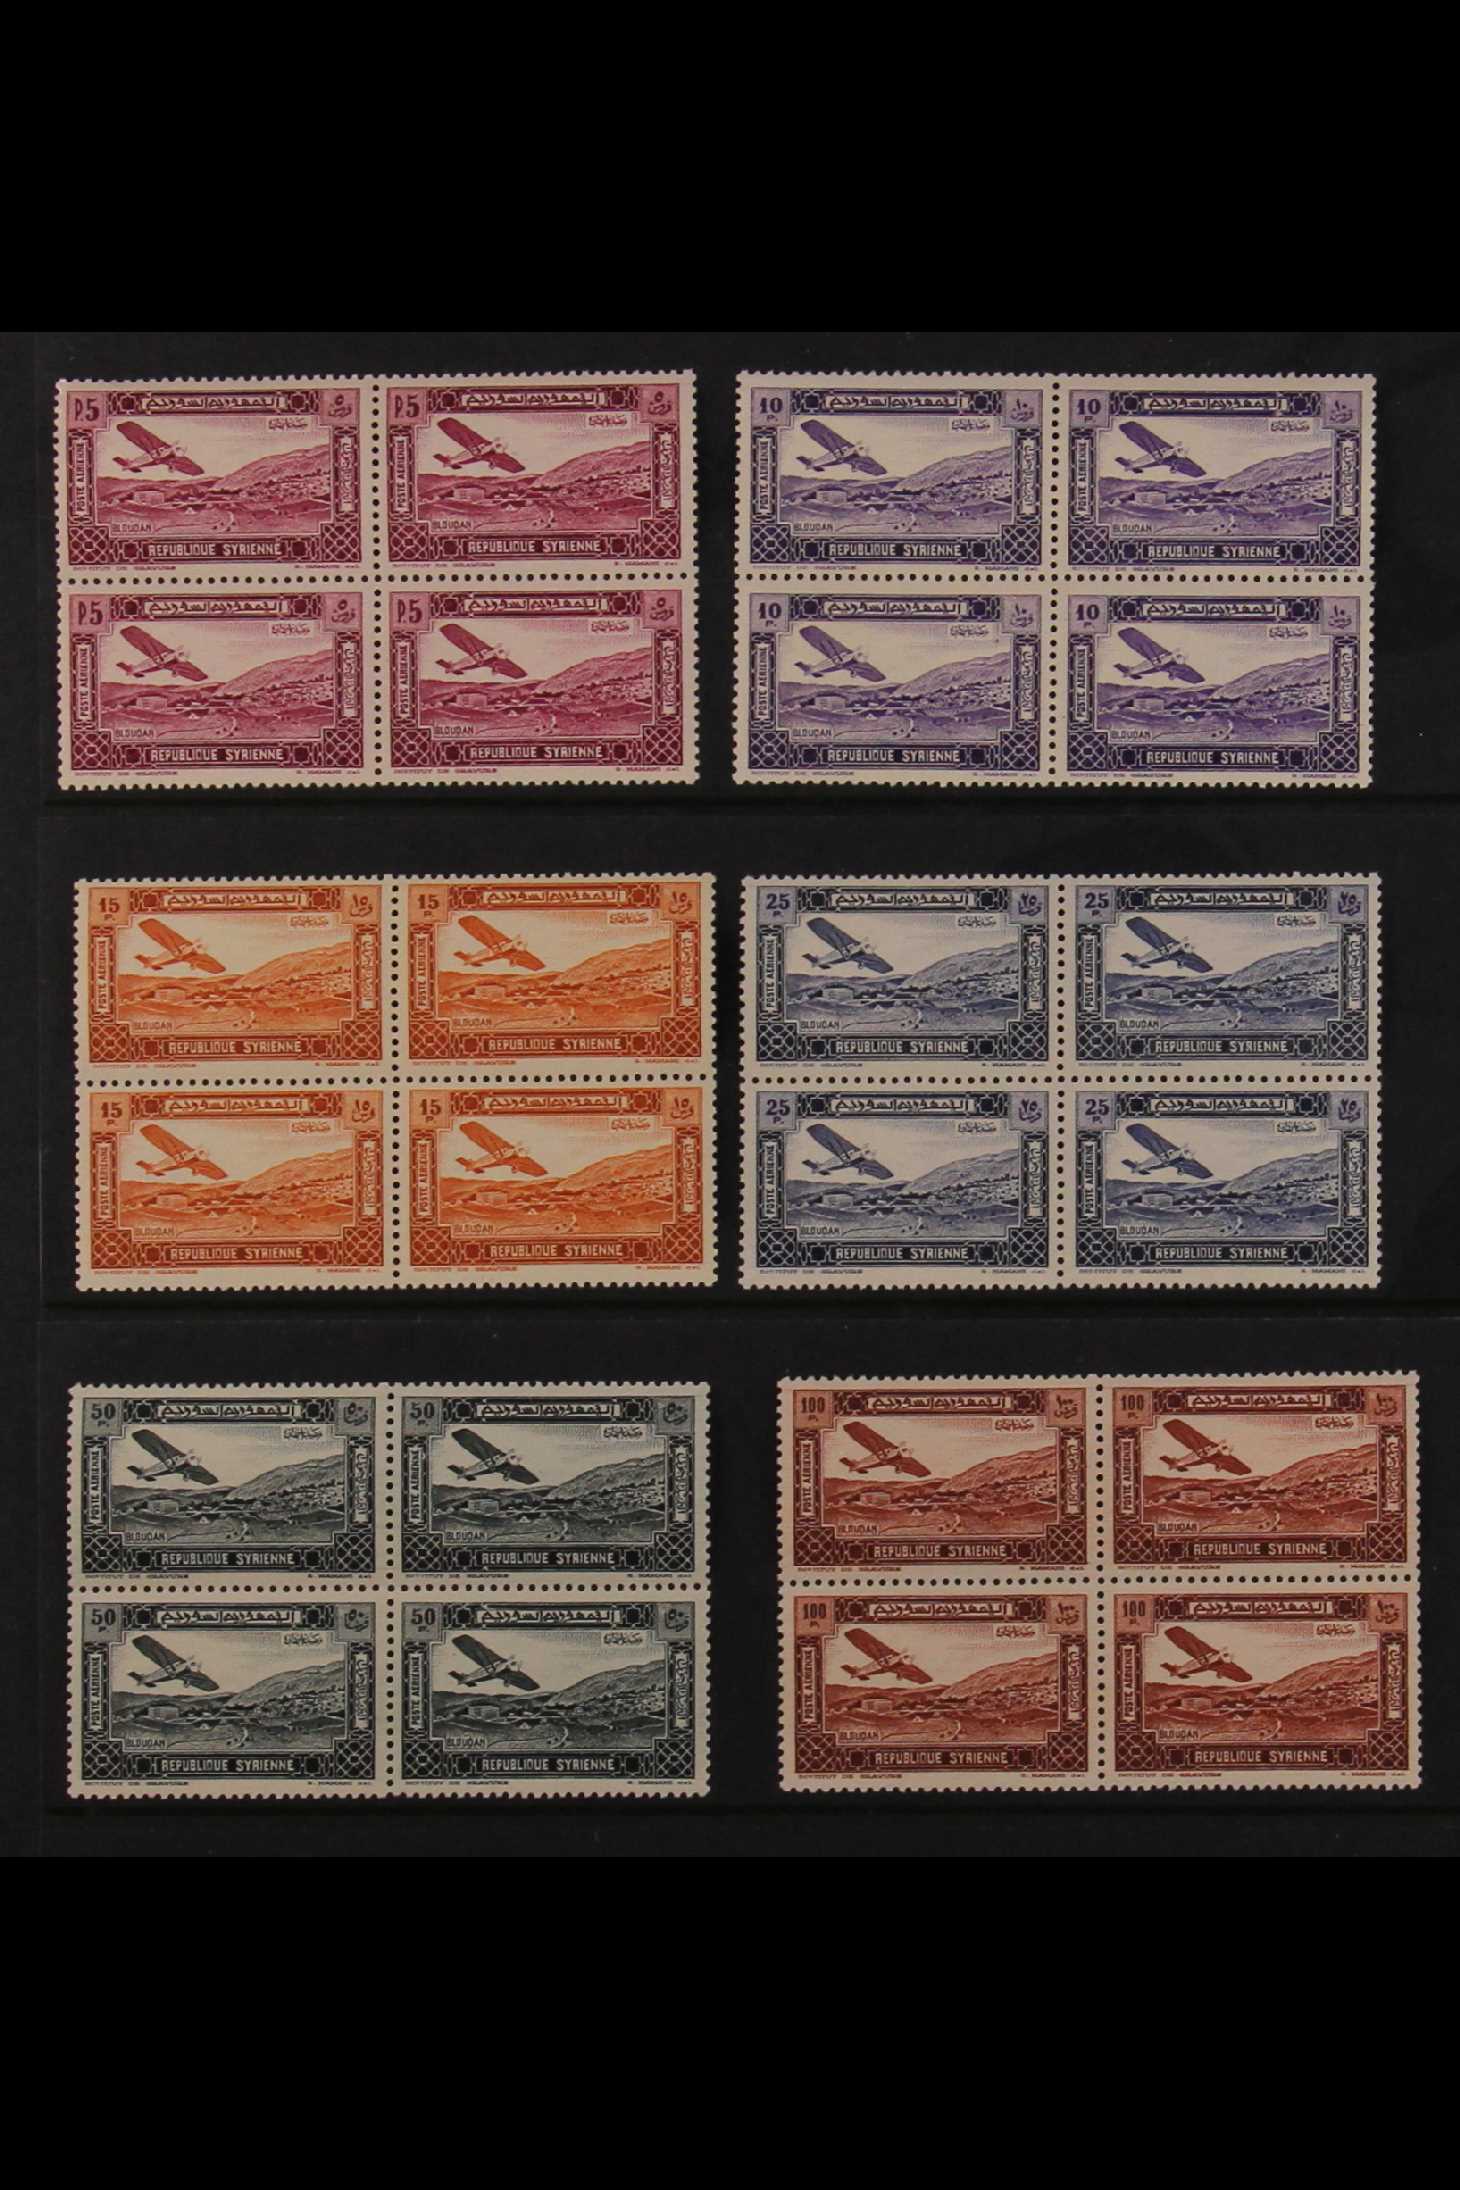 FRENCH COLONIES SYRIA 1934 Establishment of Republic complete set including Airs (SG 271/89 & 290/ - Image 2 of 4